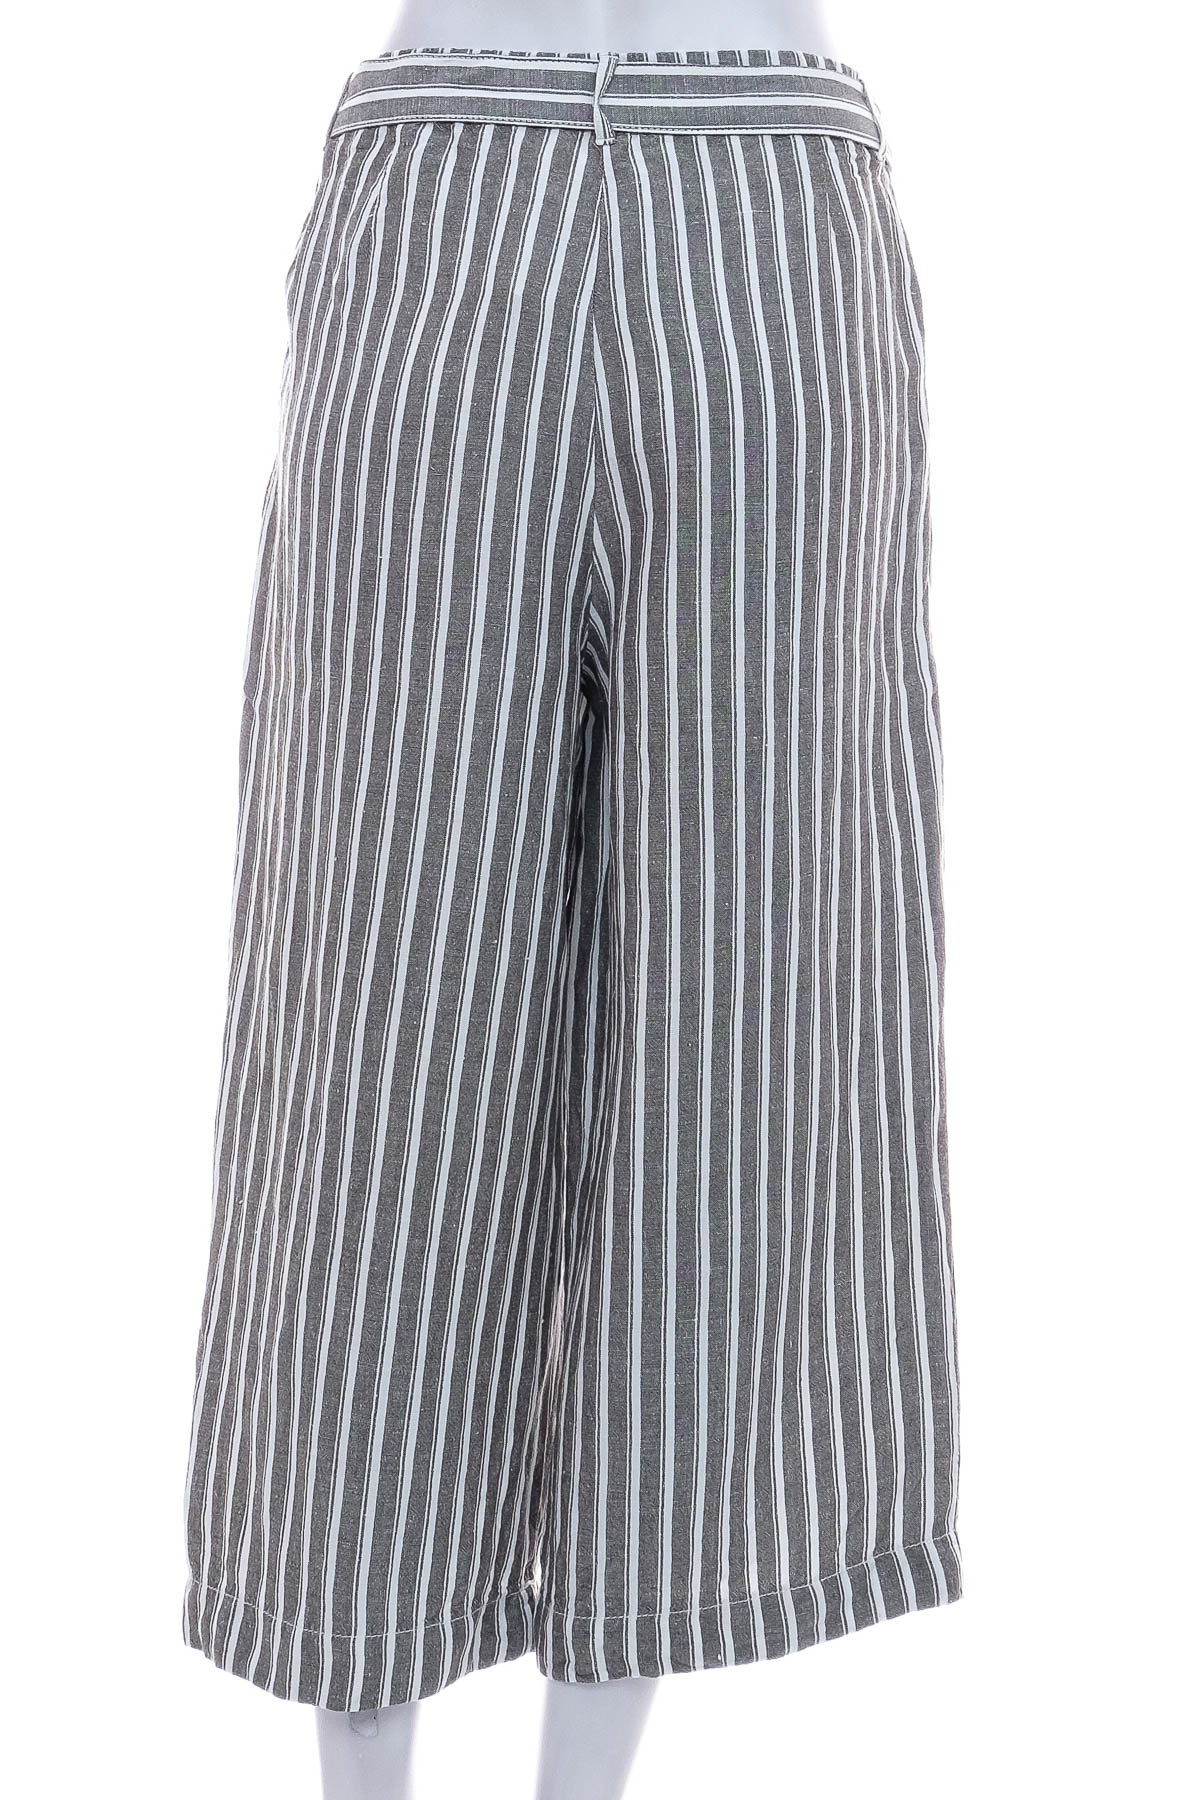 Women's trousers - TOM TAILOR - 1